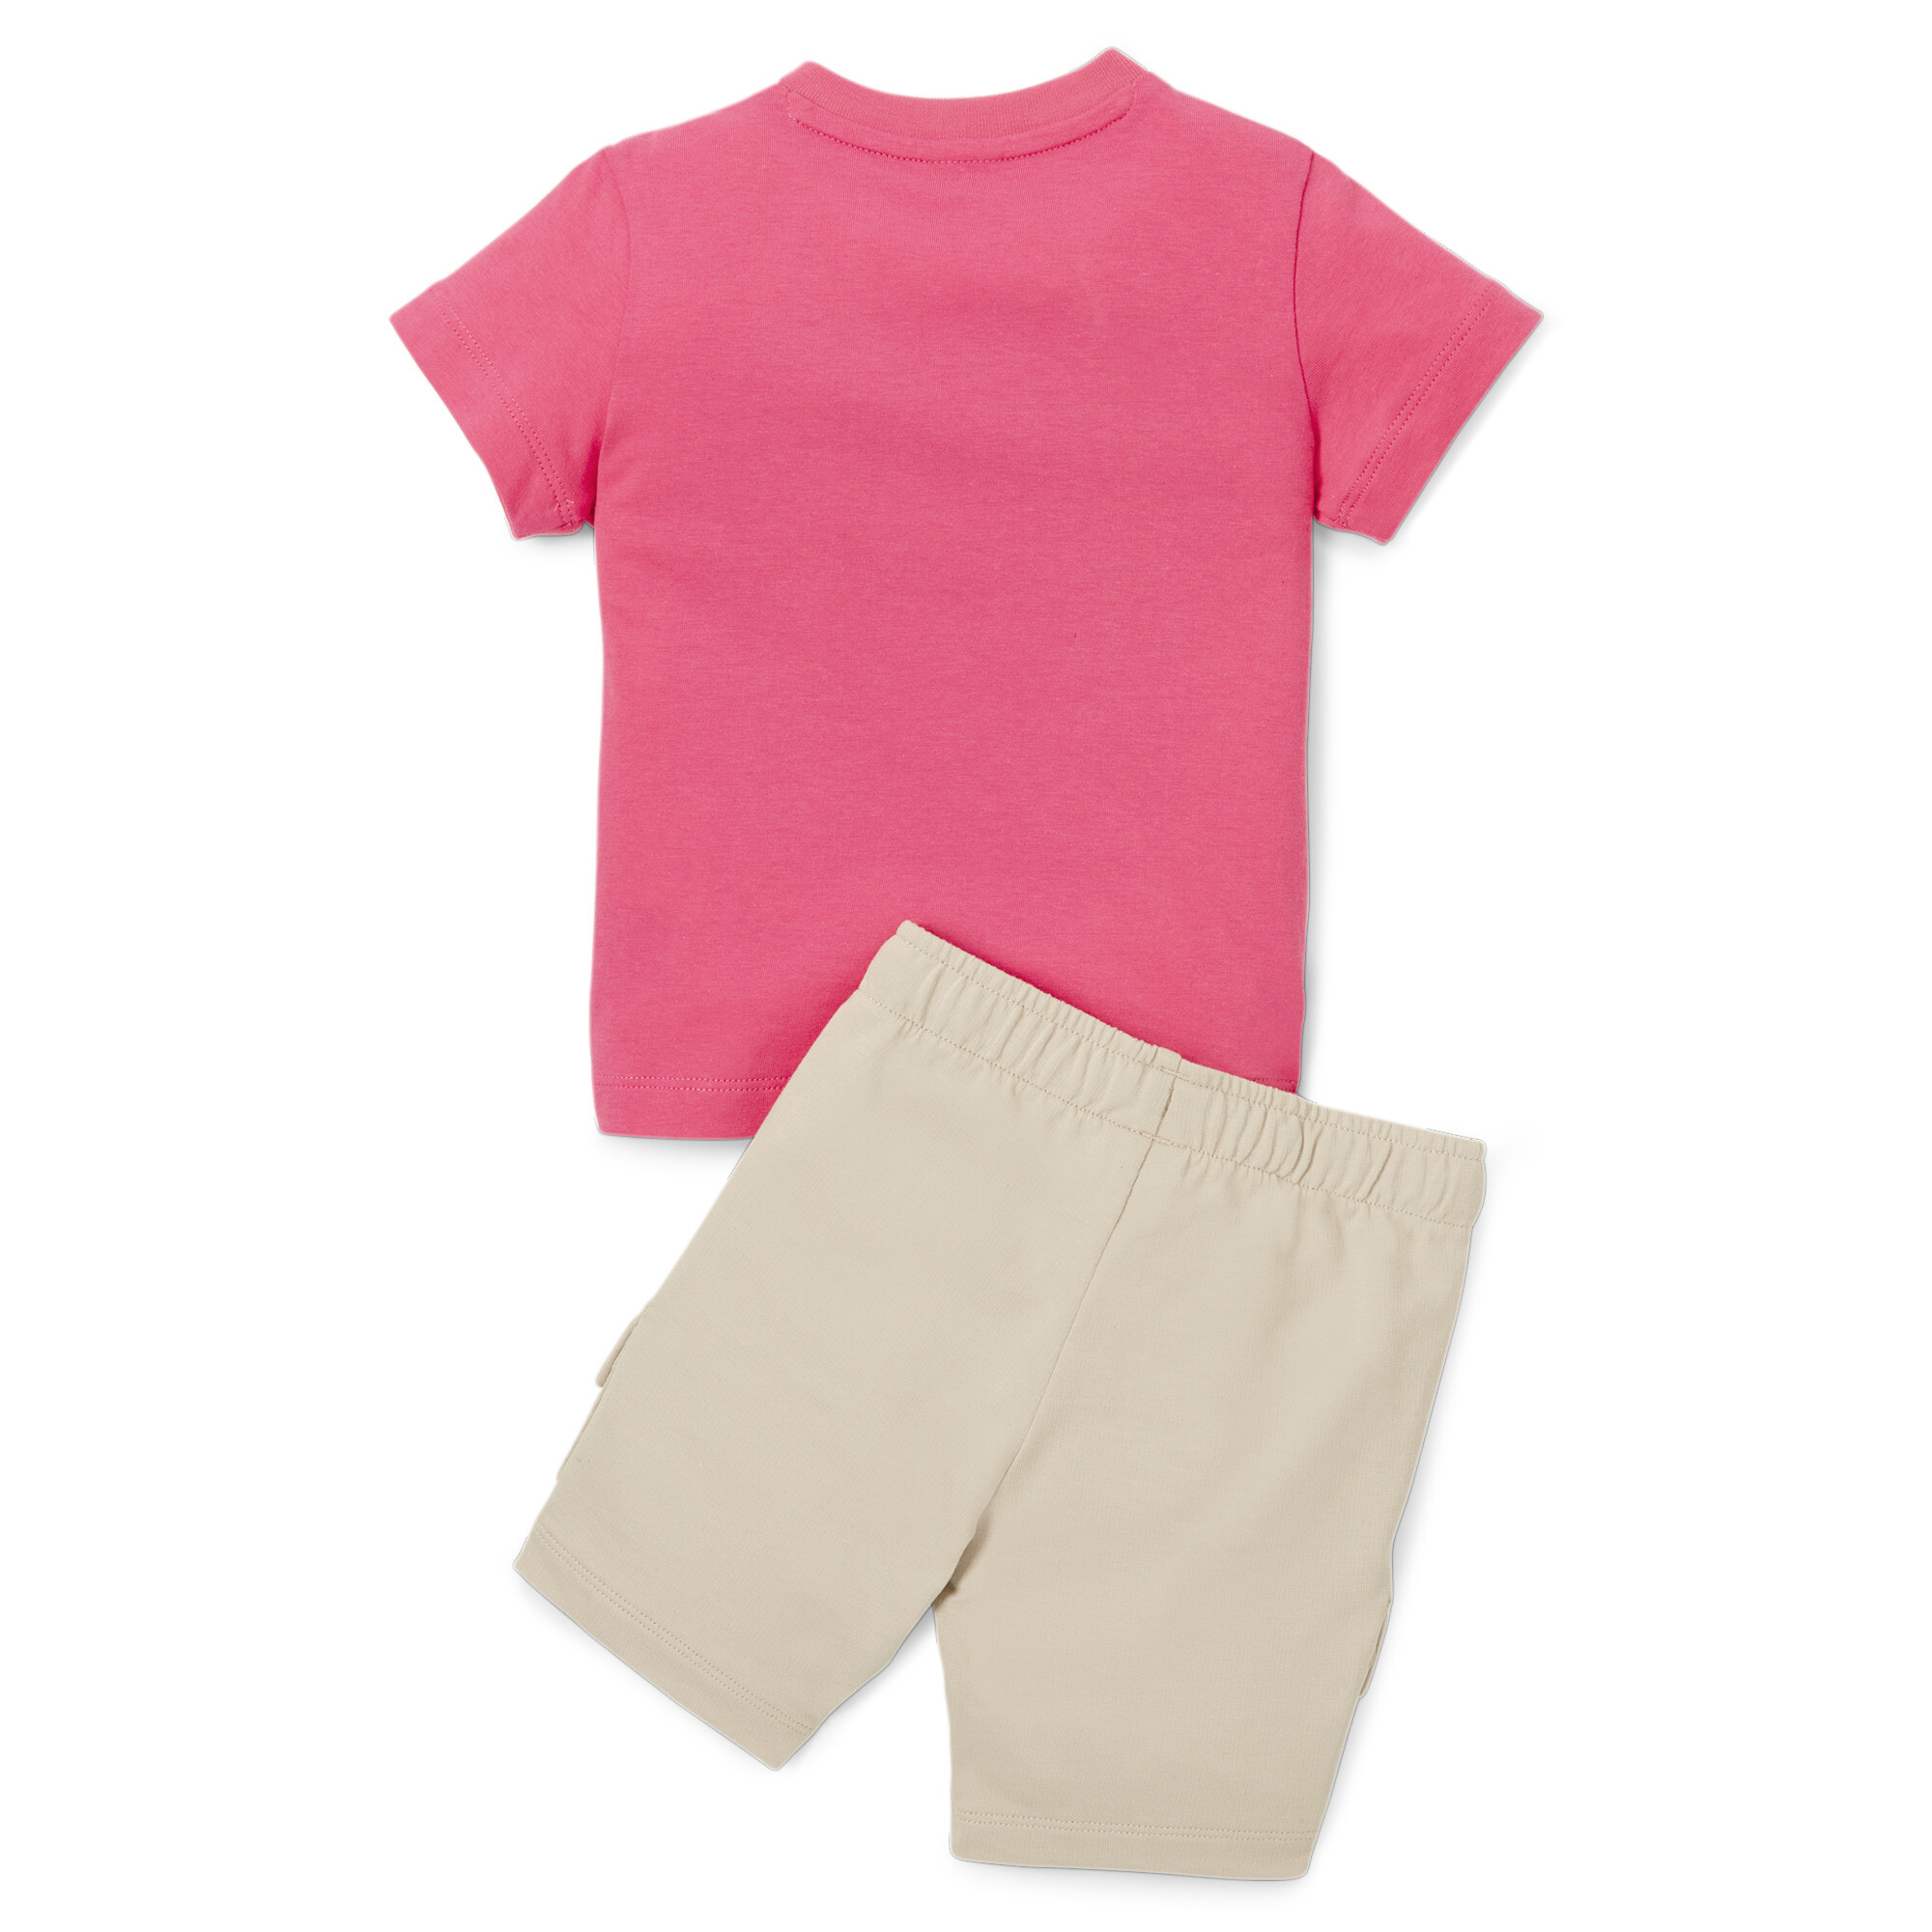 Kids' PUMA Minicats Downtown Set Baby In Pink, Size 9-12 Months